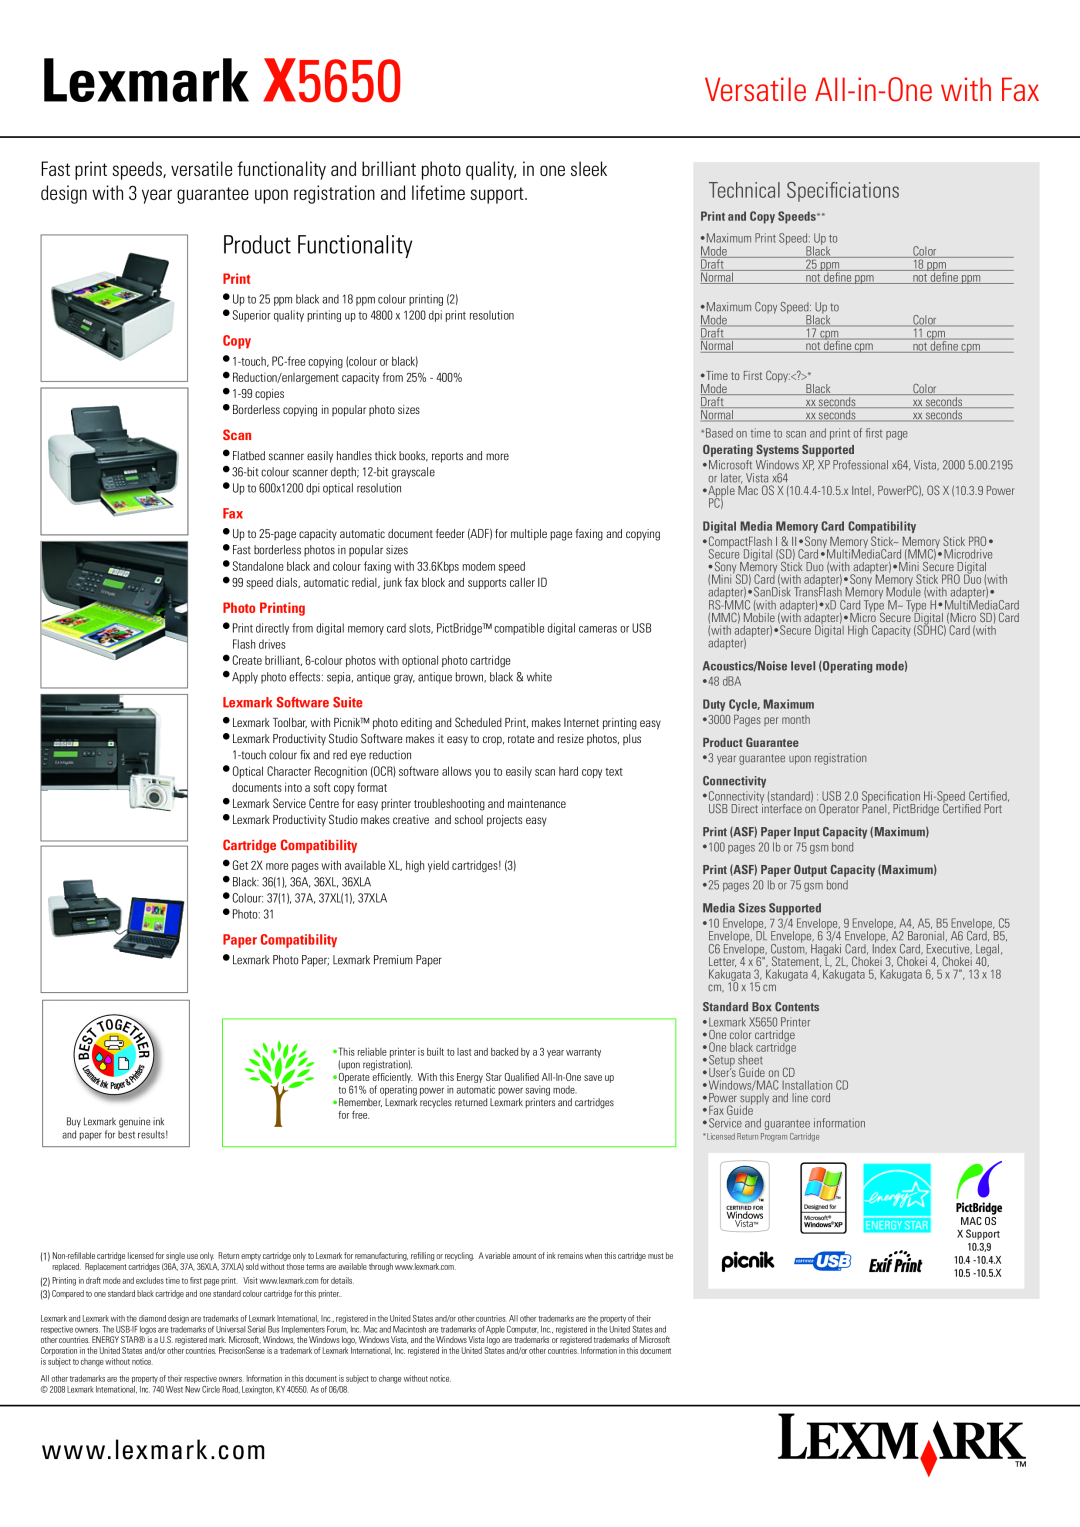 Lexmark X5650 Lexmark, Versatile All-in-One with Fax, w w w.lexmark.com, Product Functionality, Technical Specificiations 